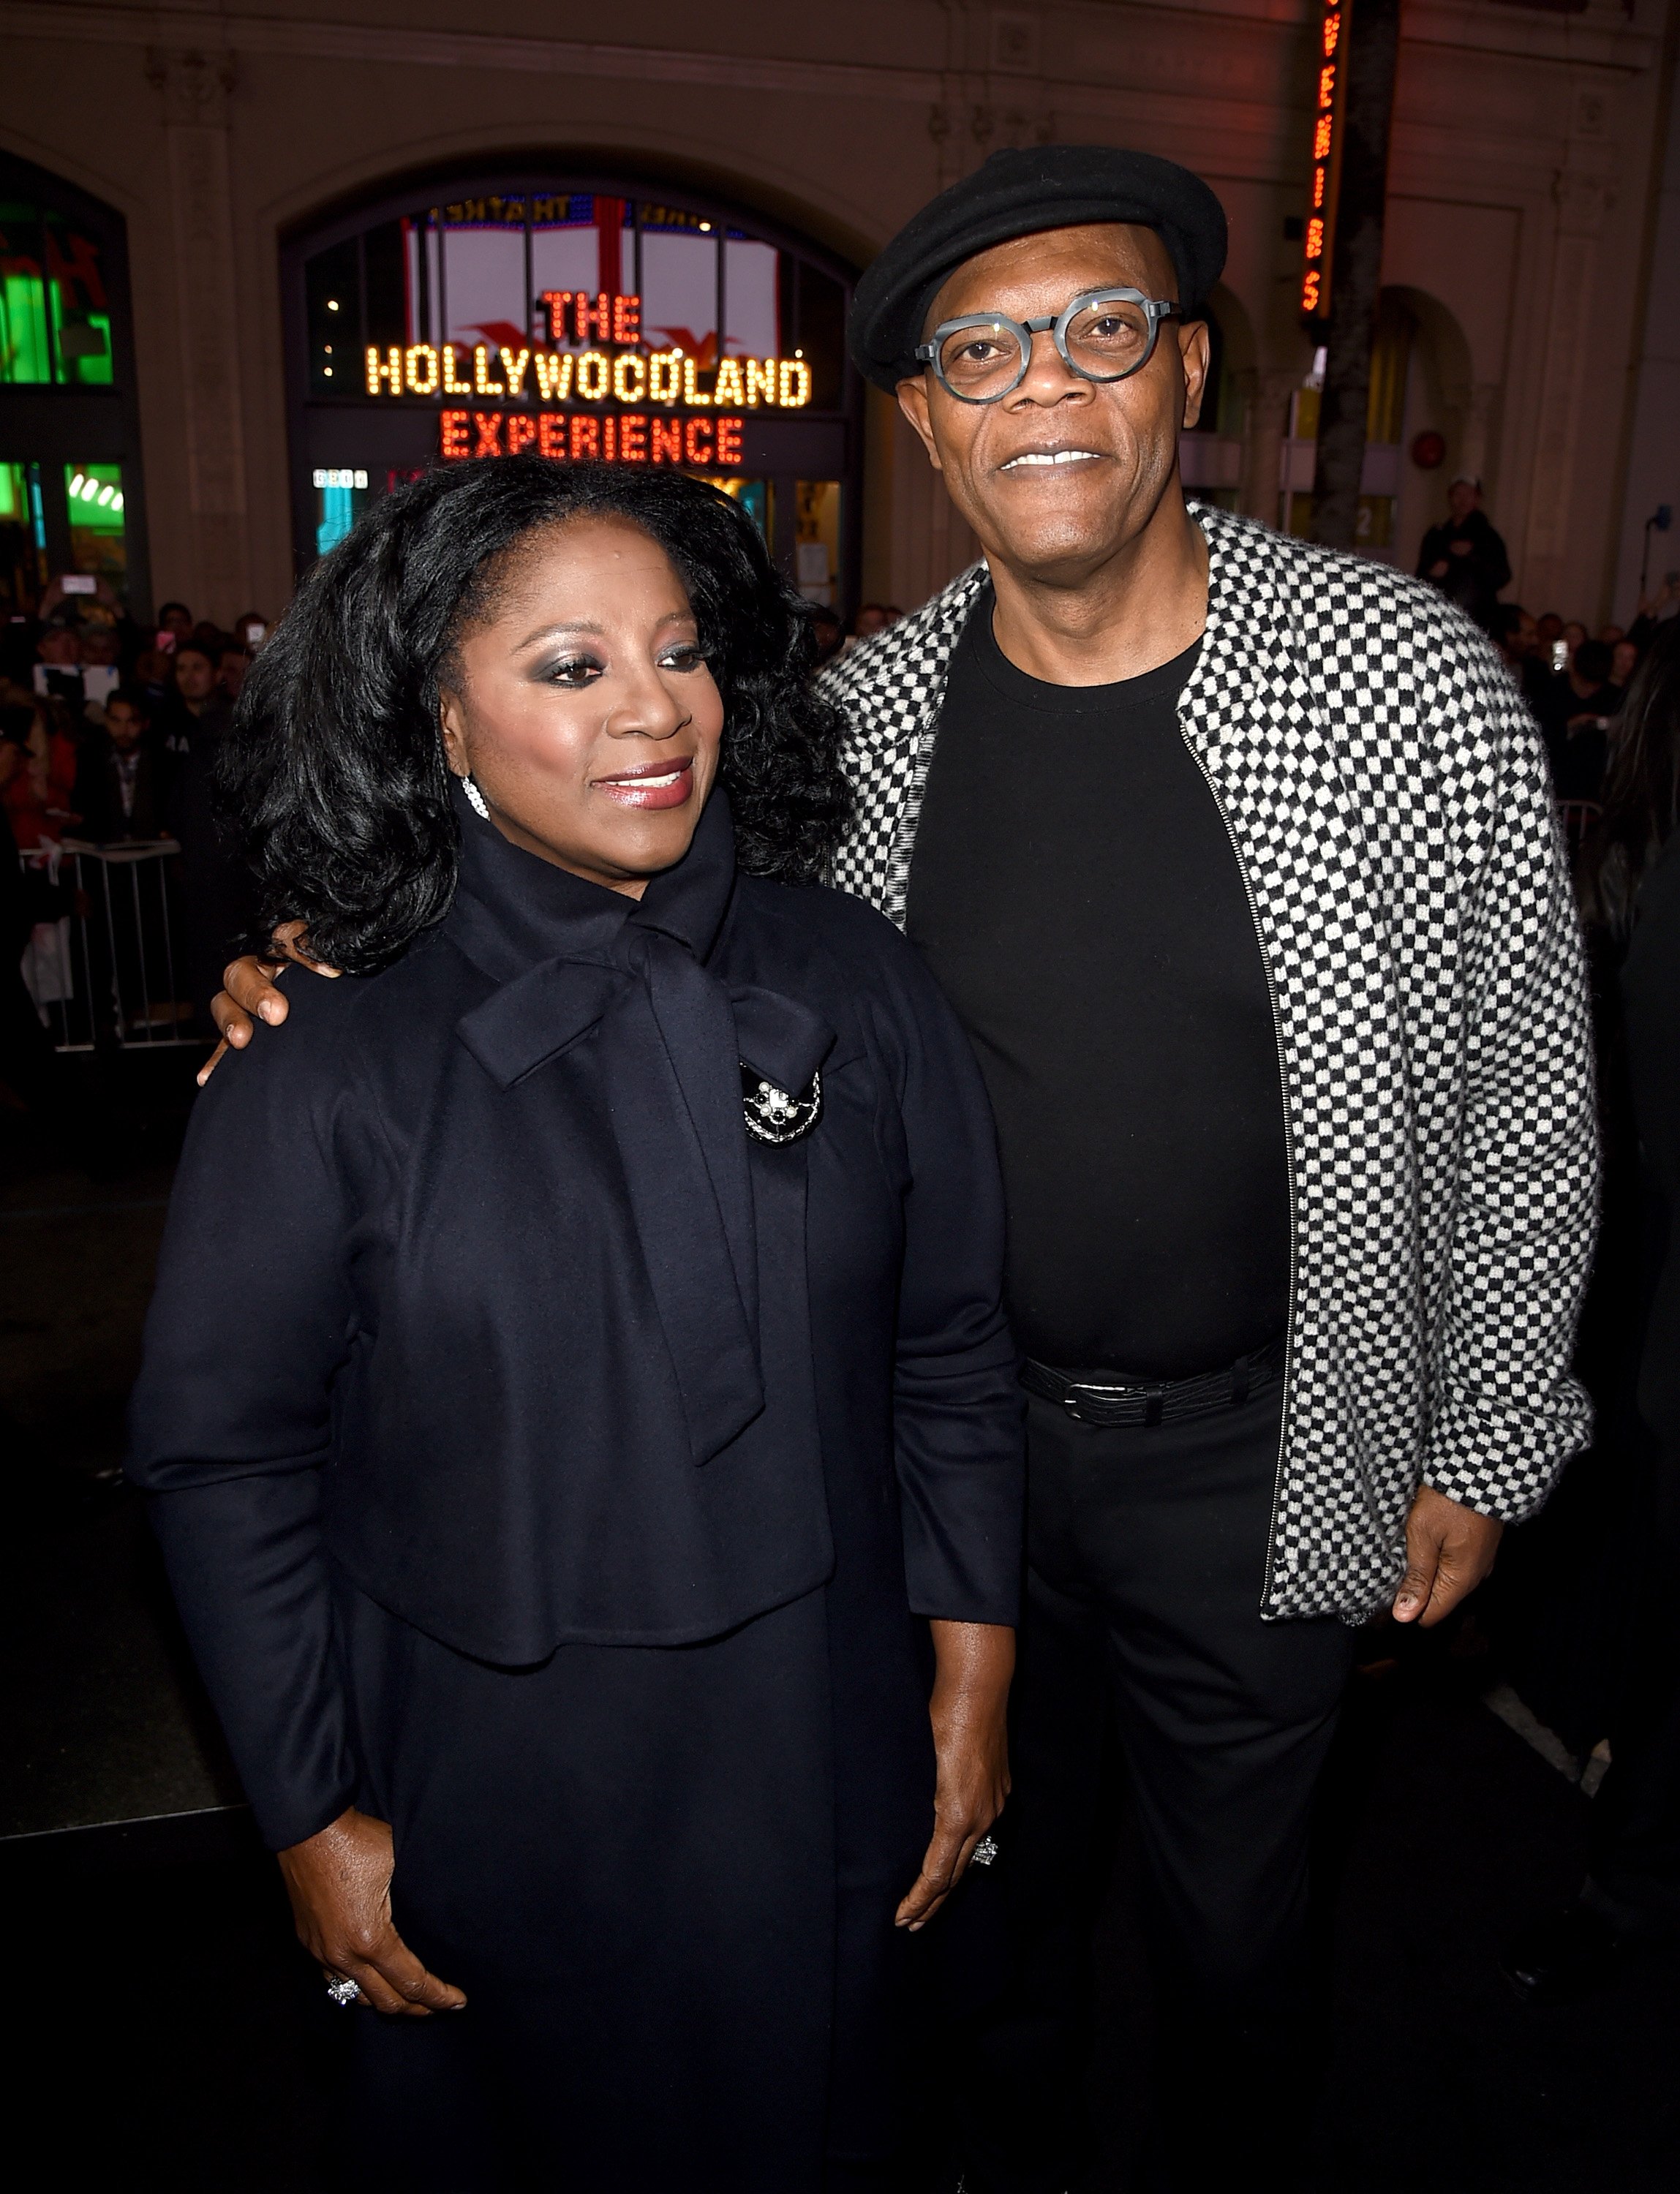 Samuel L. Jackson and LaTanya Richardson arrive at the premiere of Paramount Pictures' "xXx: Return of Xander Cage" at the Chinese Theatre on January 19, 2017, in Los Angeles, California. | Source: Getty Images